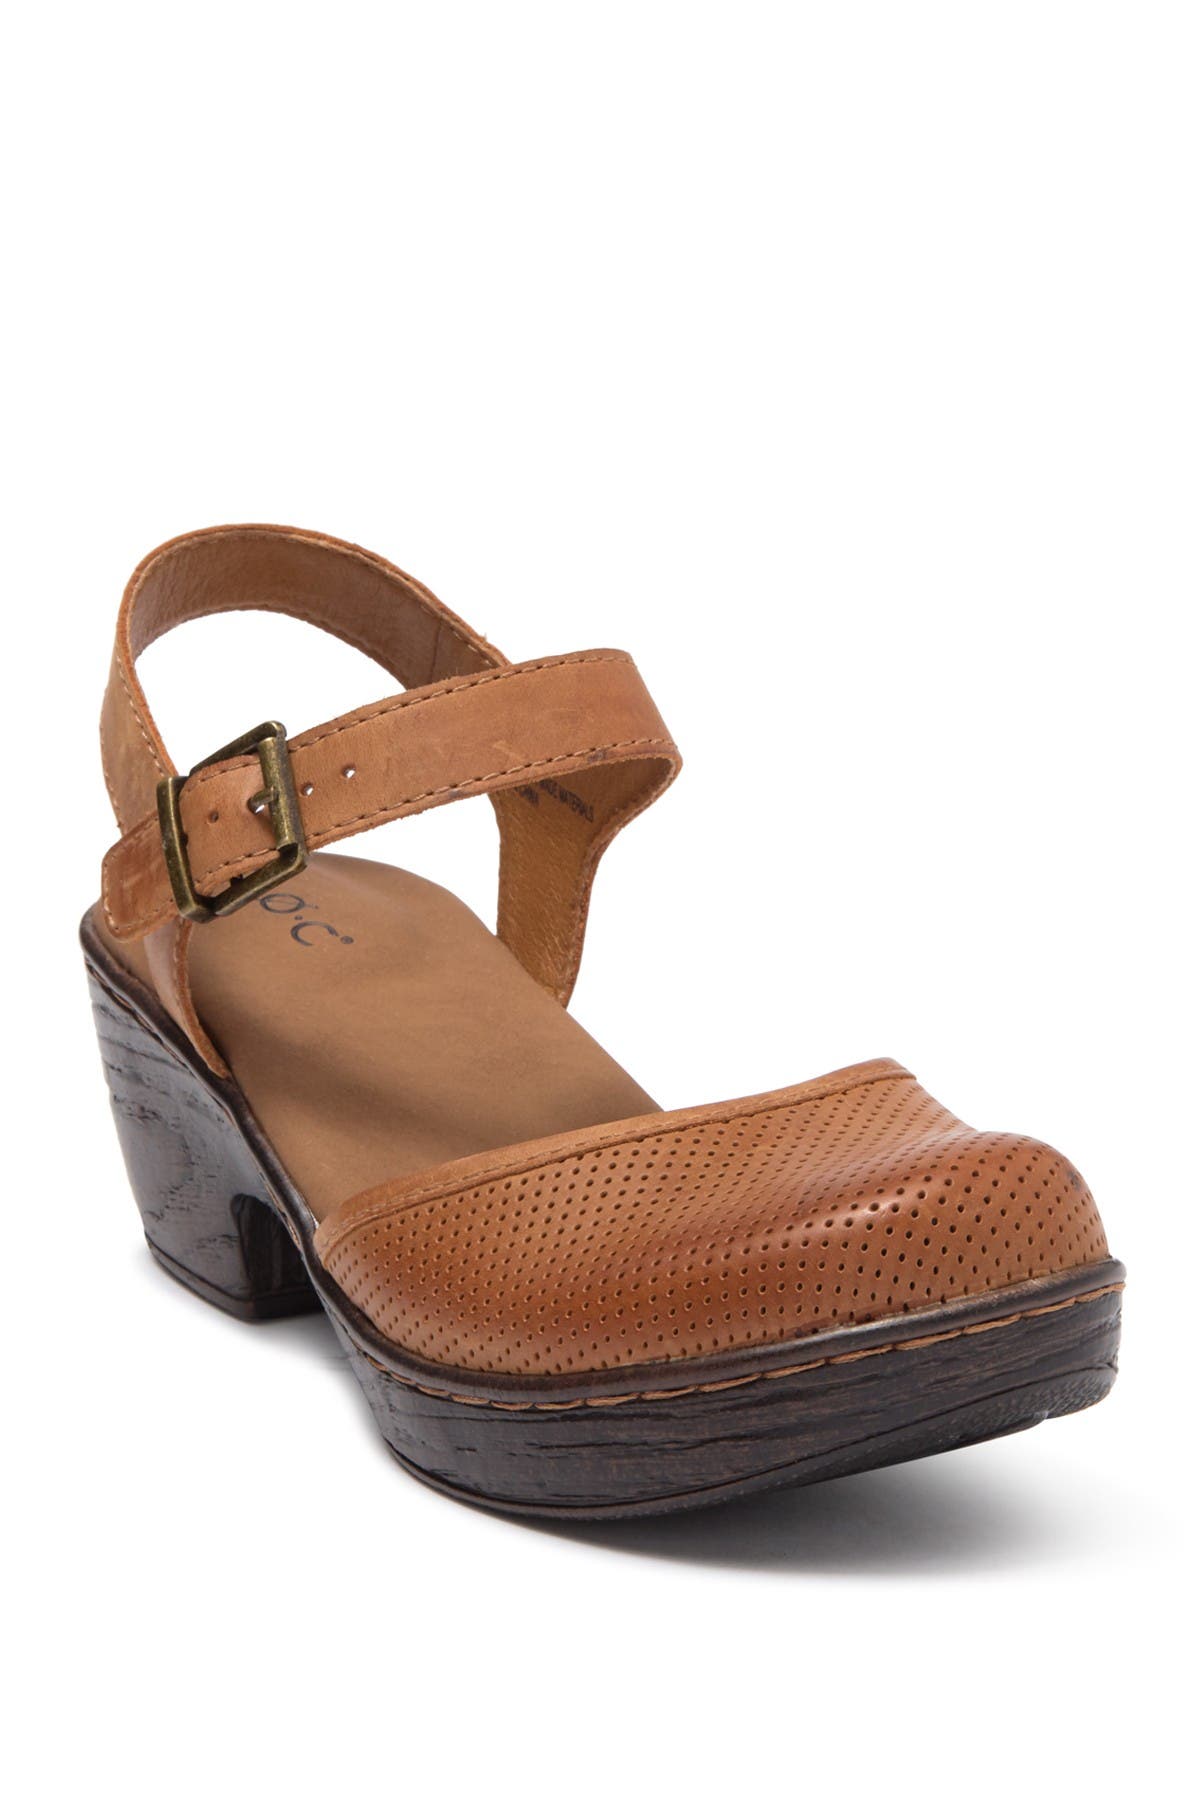 Women's Clogs Clearance | Nordstrom Rack